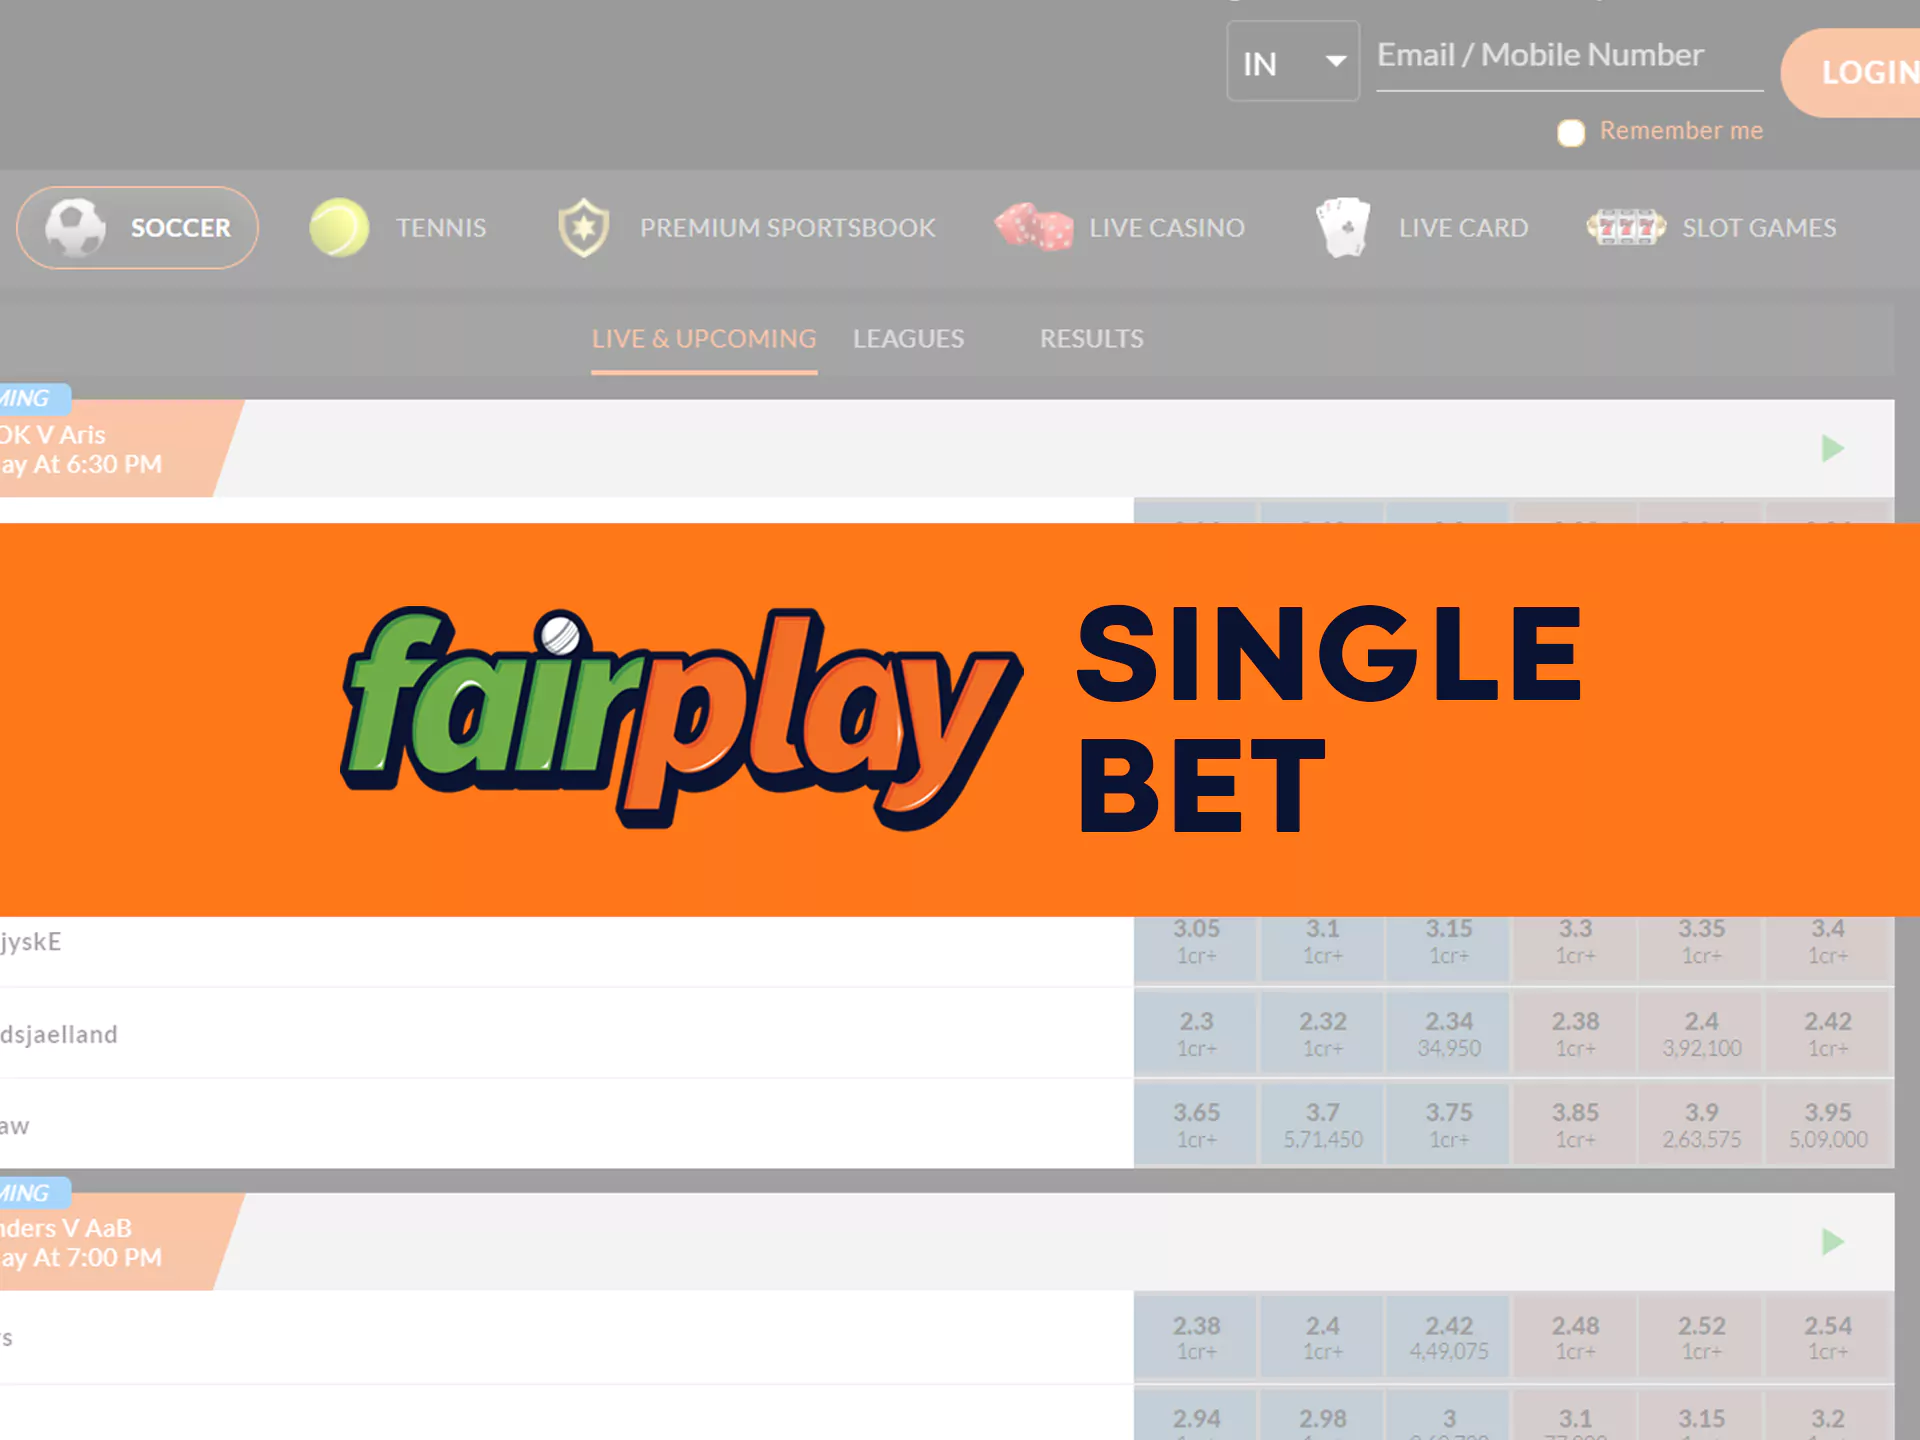 Win with single bet at Fairplay.